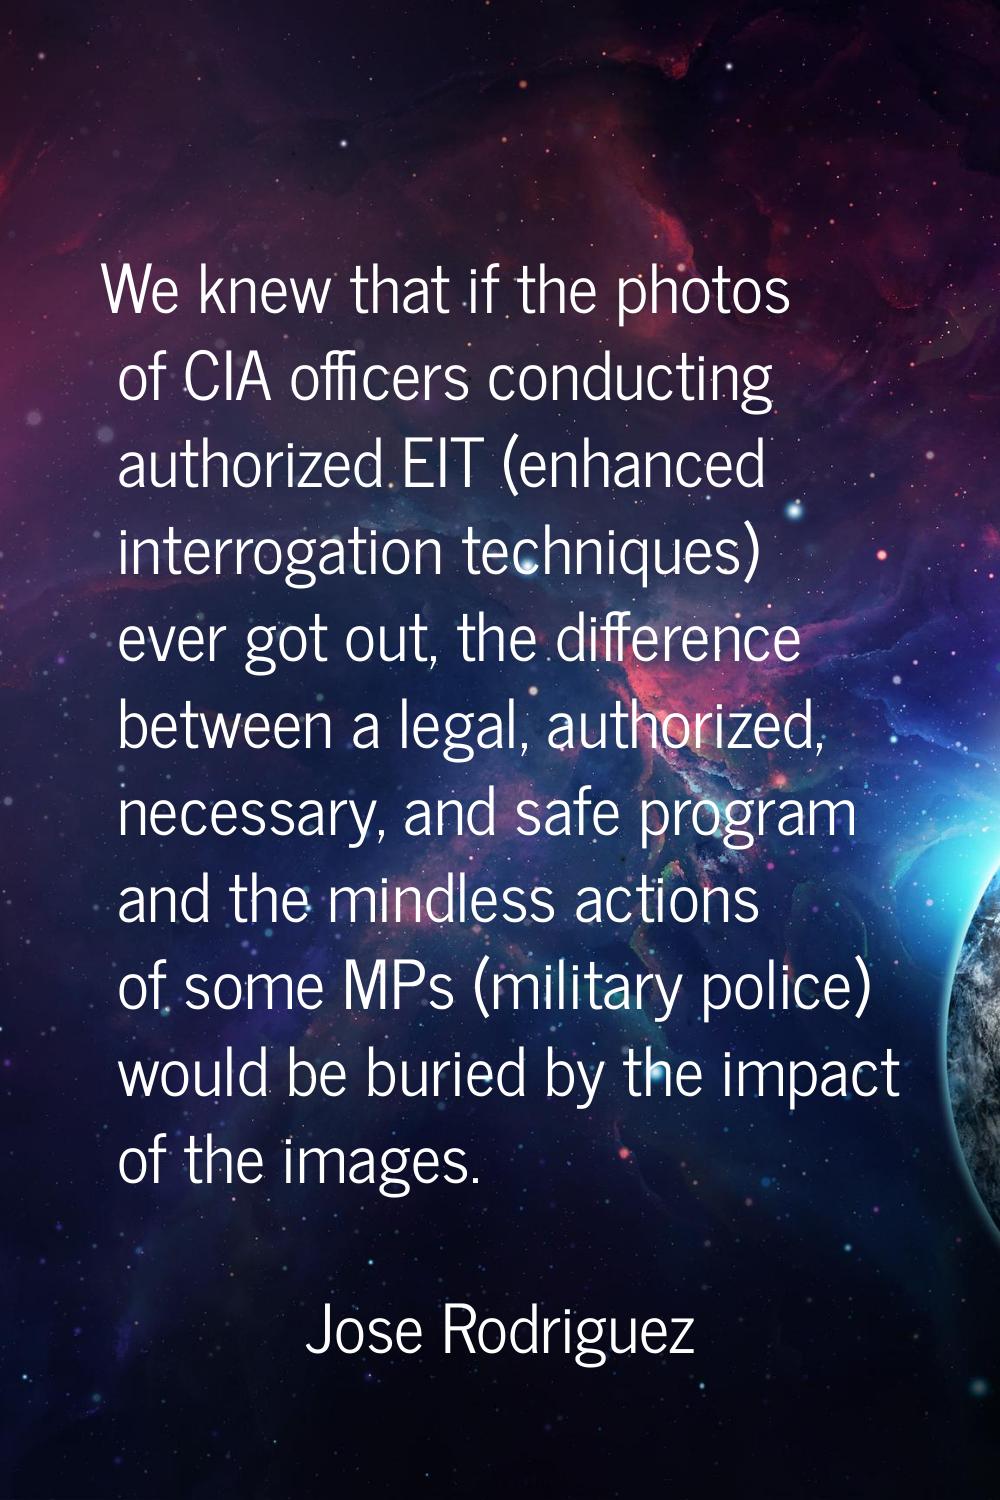 We knew that if the photos of CIA officers conducting authorized EIT (enhanced interrogation techni